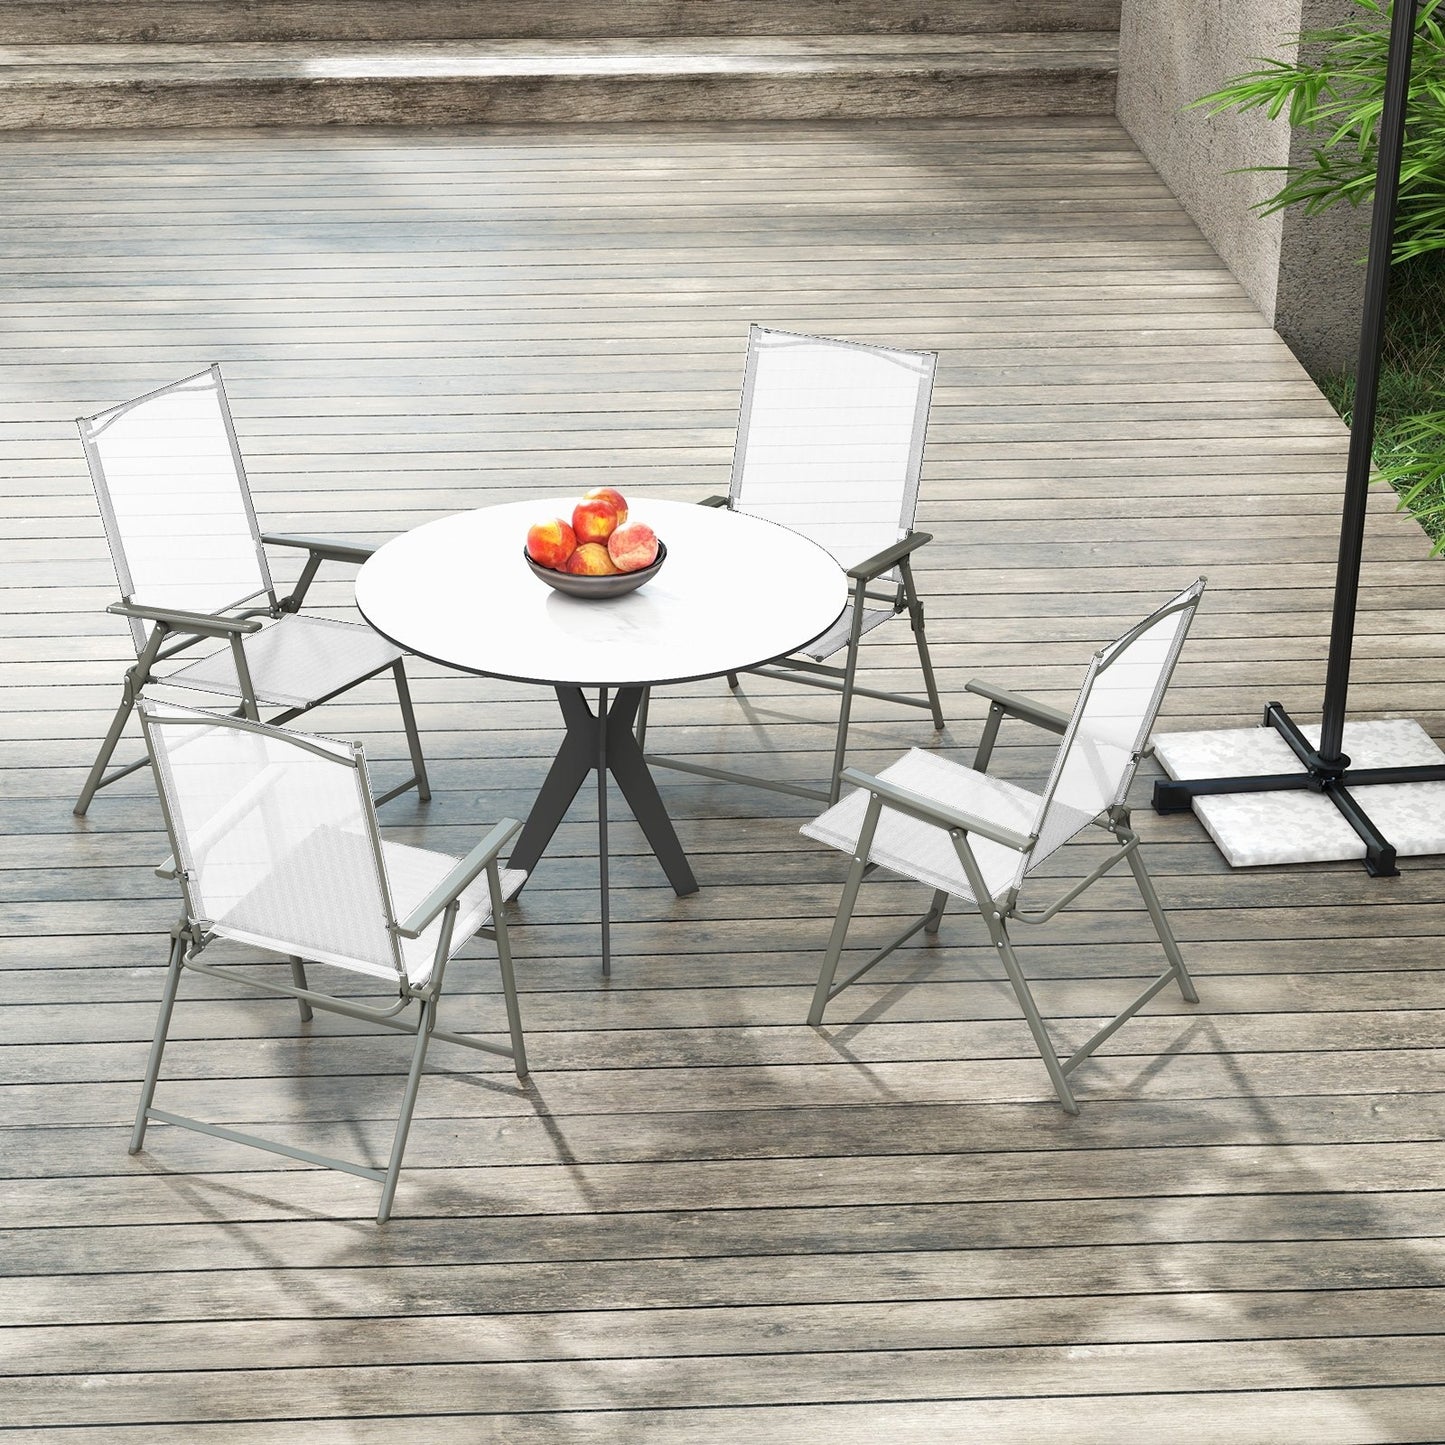 Set of 4 Patio Folding Chair Set with Rustproof Metal Frame, White